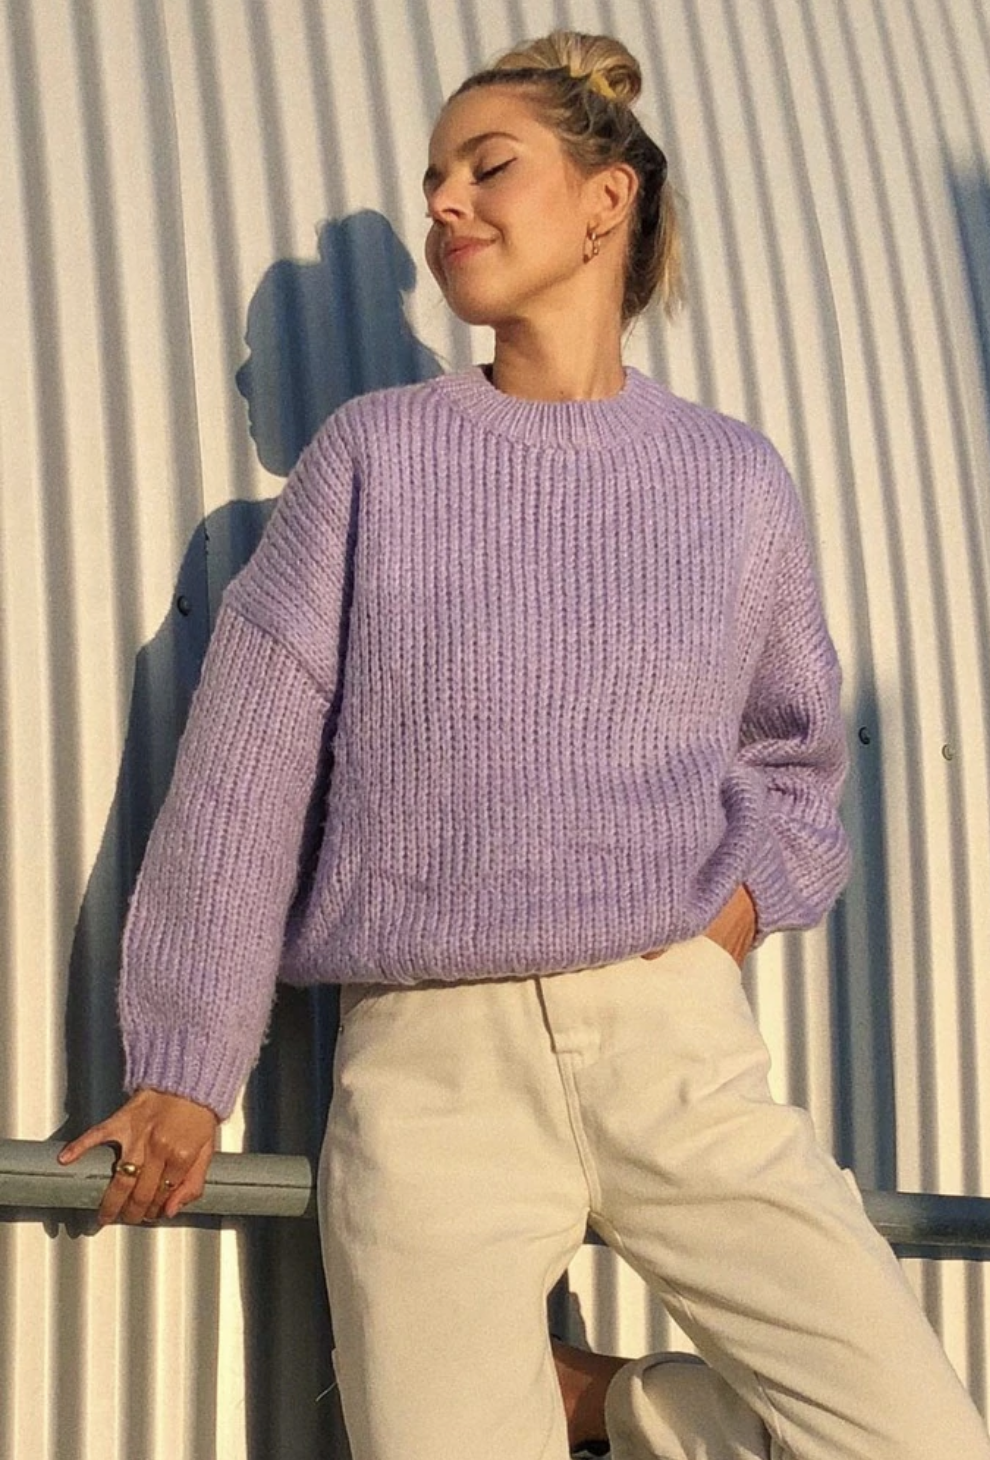 How To Wear Lavender Sweater